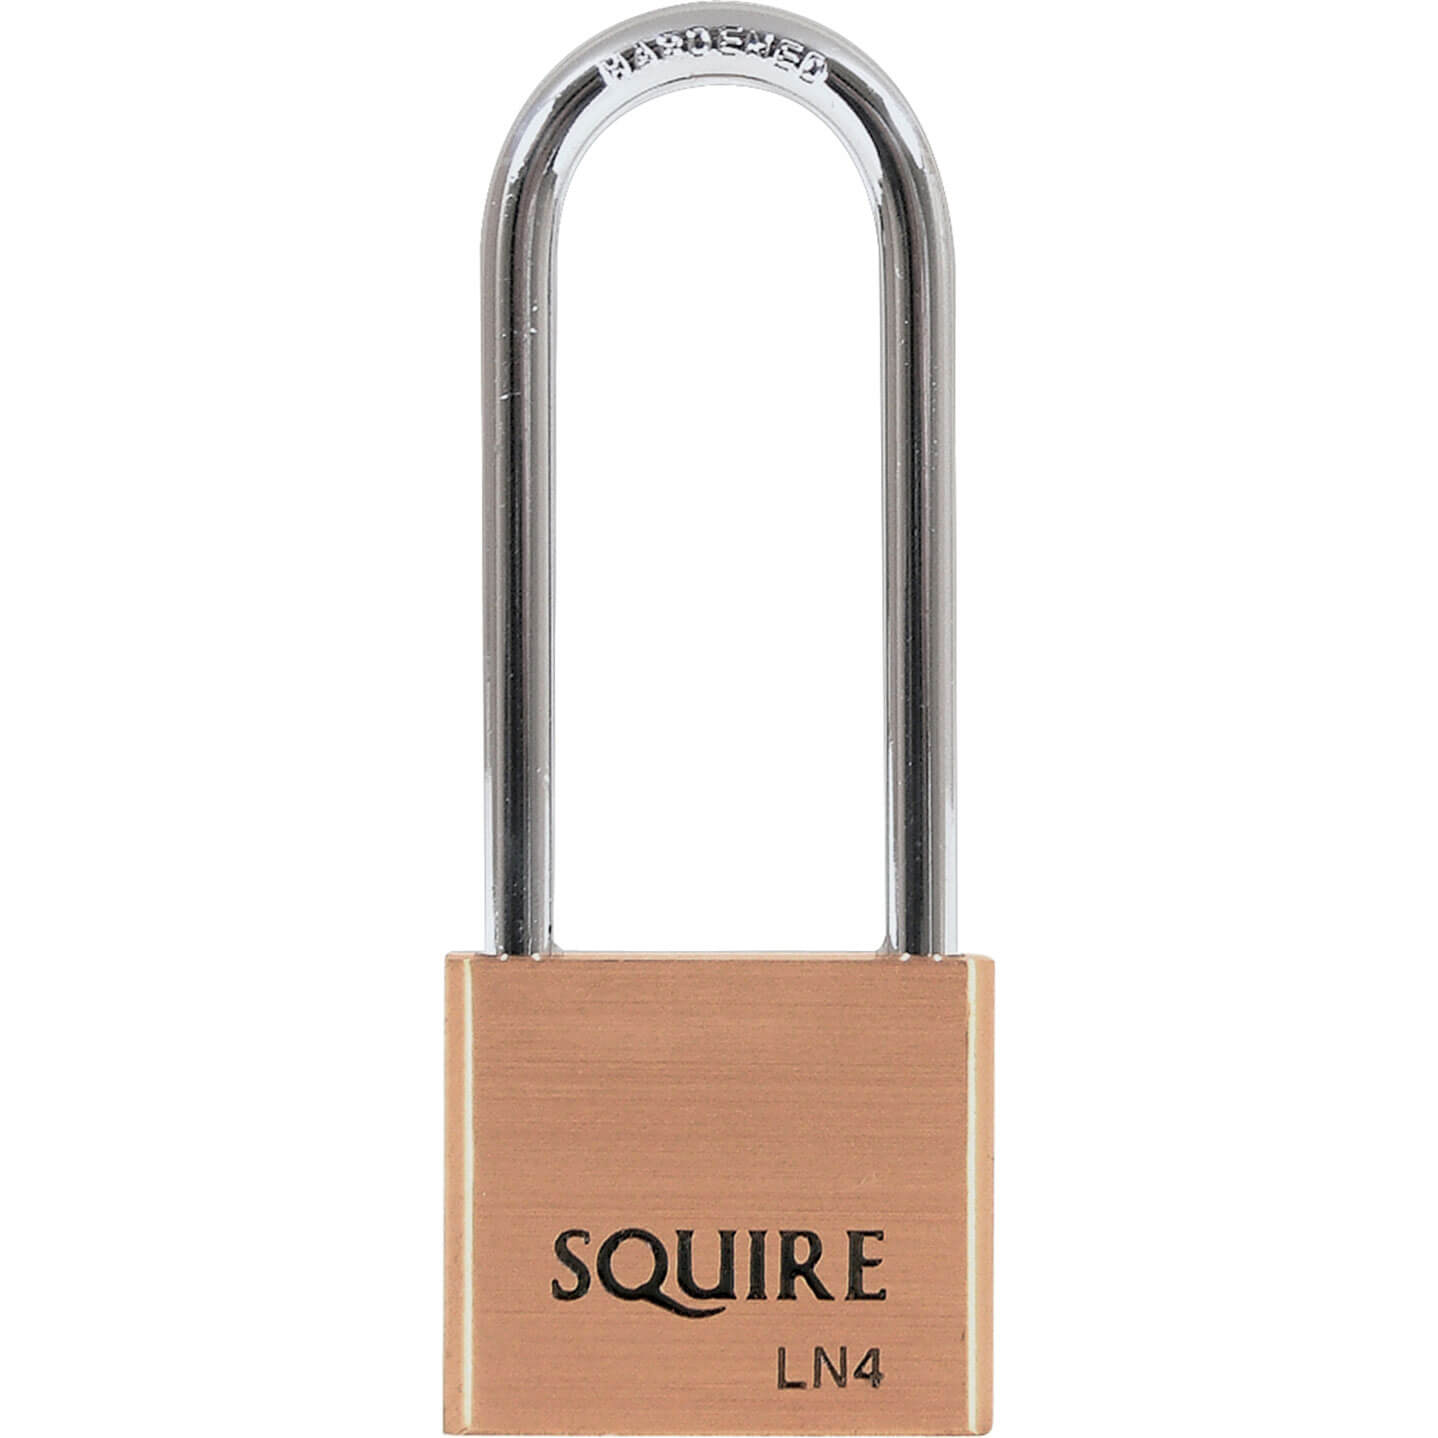 Image of Squire Lion Series Brass Padlock 40mm Long